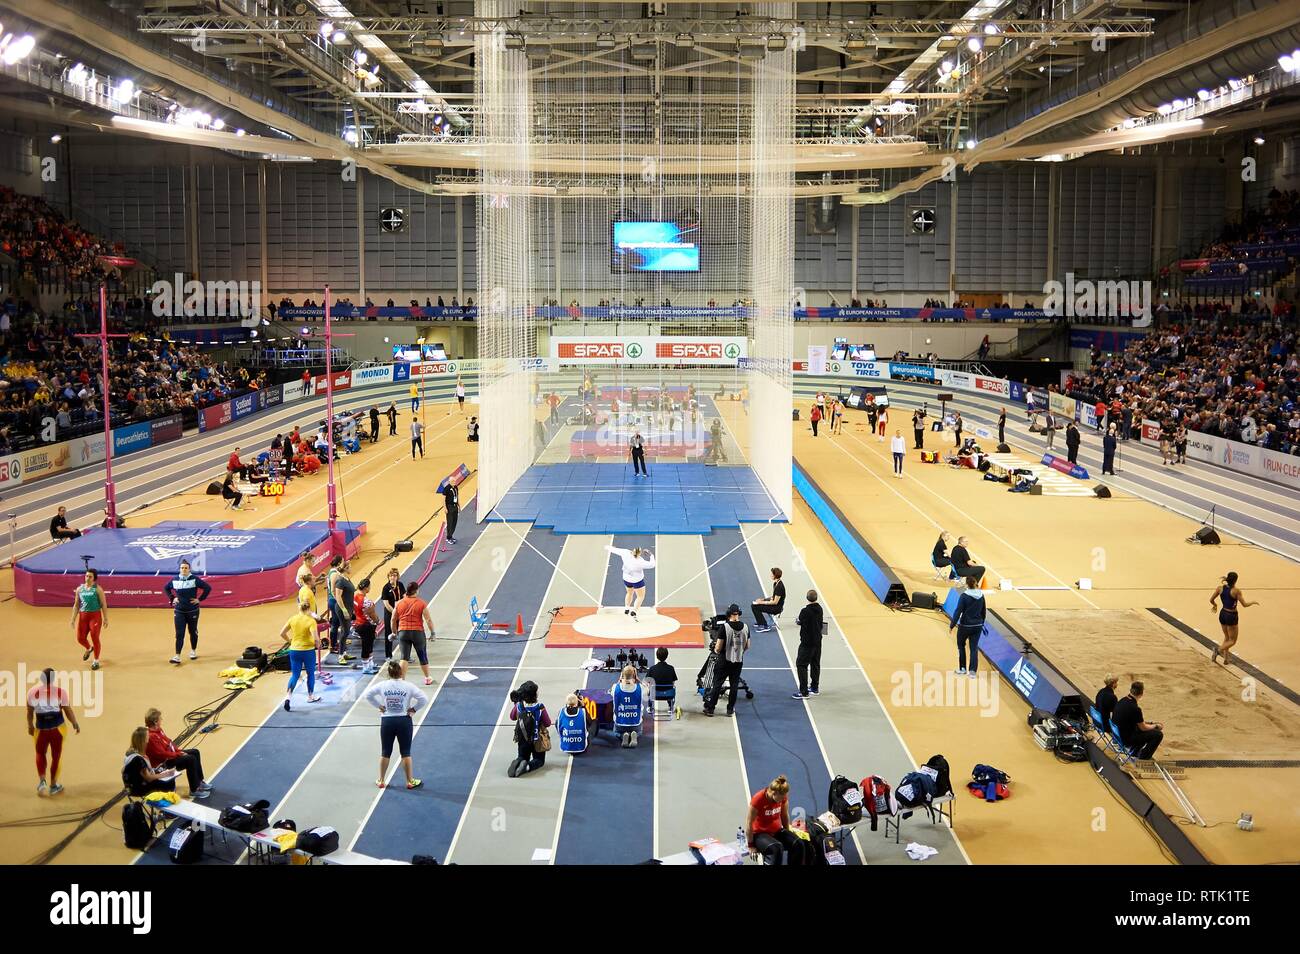 2019 European Athletics Indoor Championships on March 1, 2019 in Glasgow, Scotland. Pictured: Stock Photo